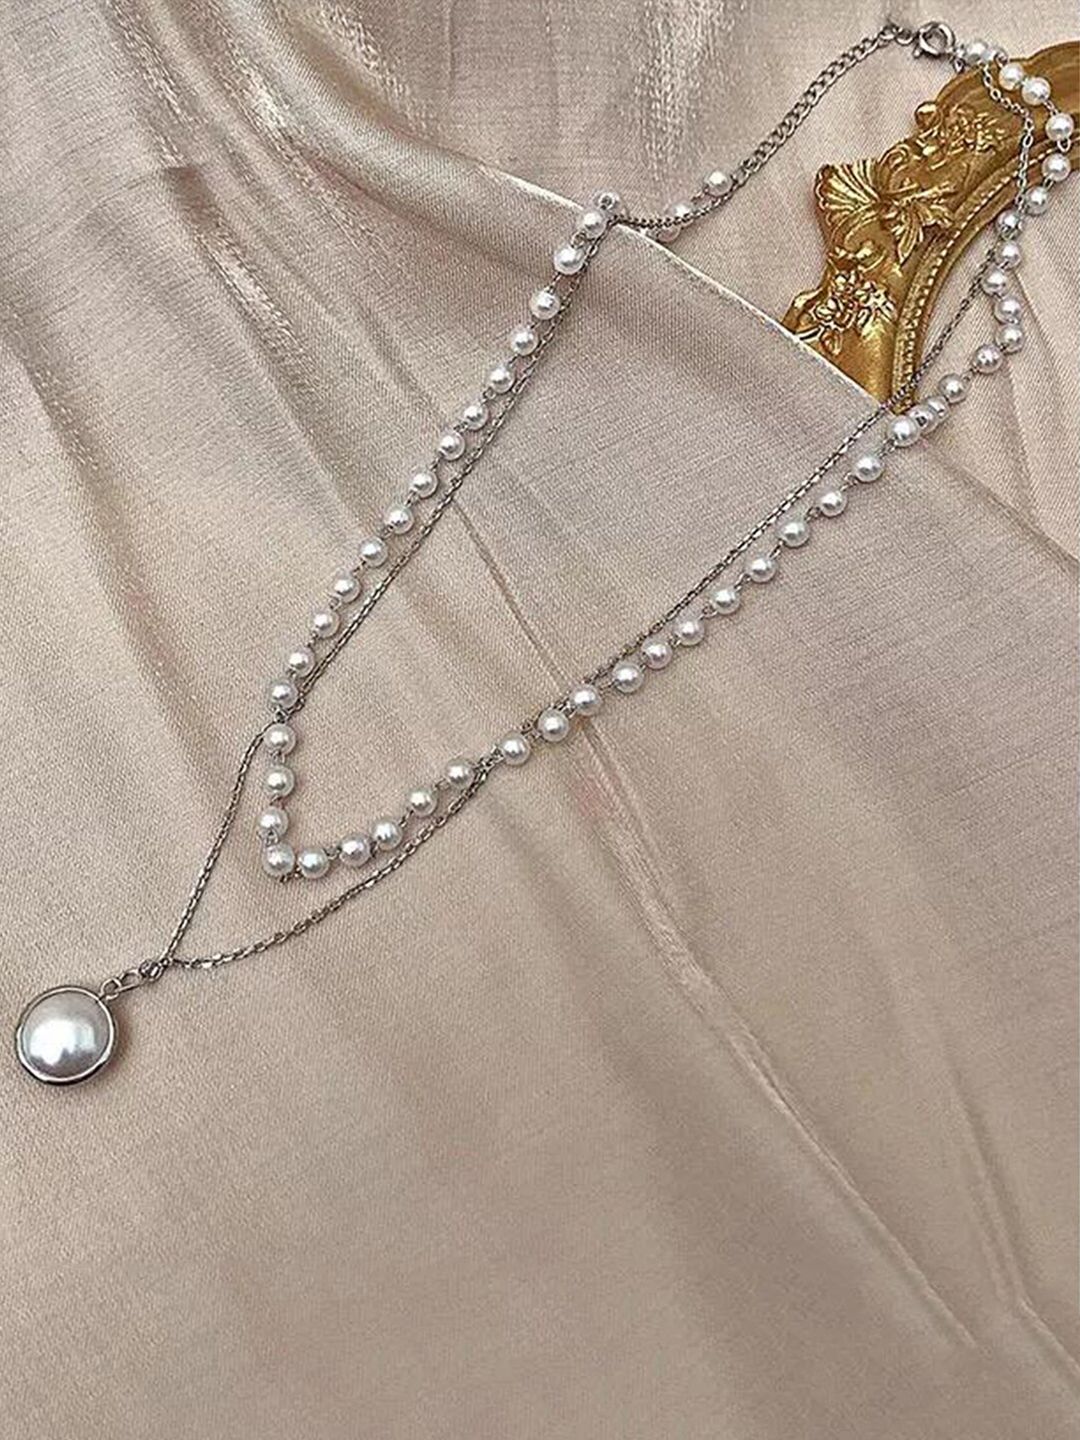 Vembley Gold-Toned Silver-Plated Layered Beads & Pearl Studded Pendant Necklace Price in India